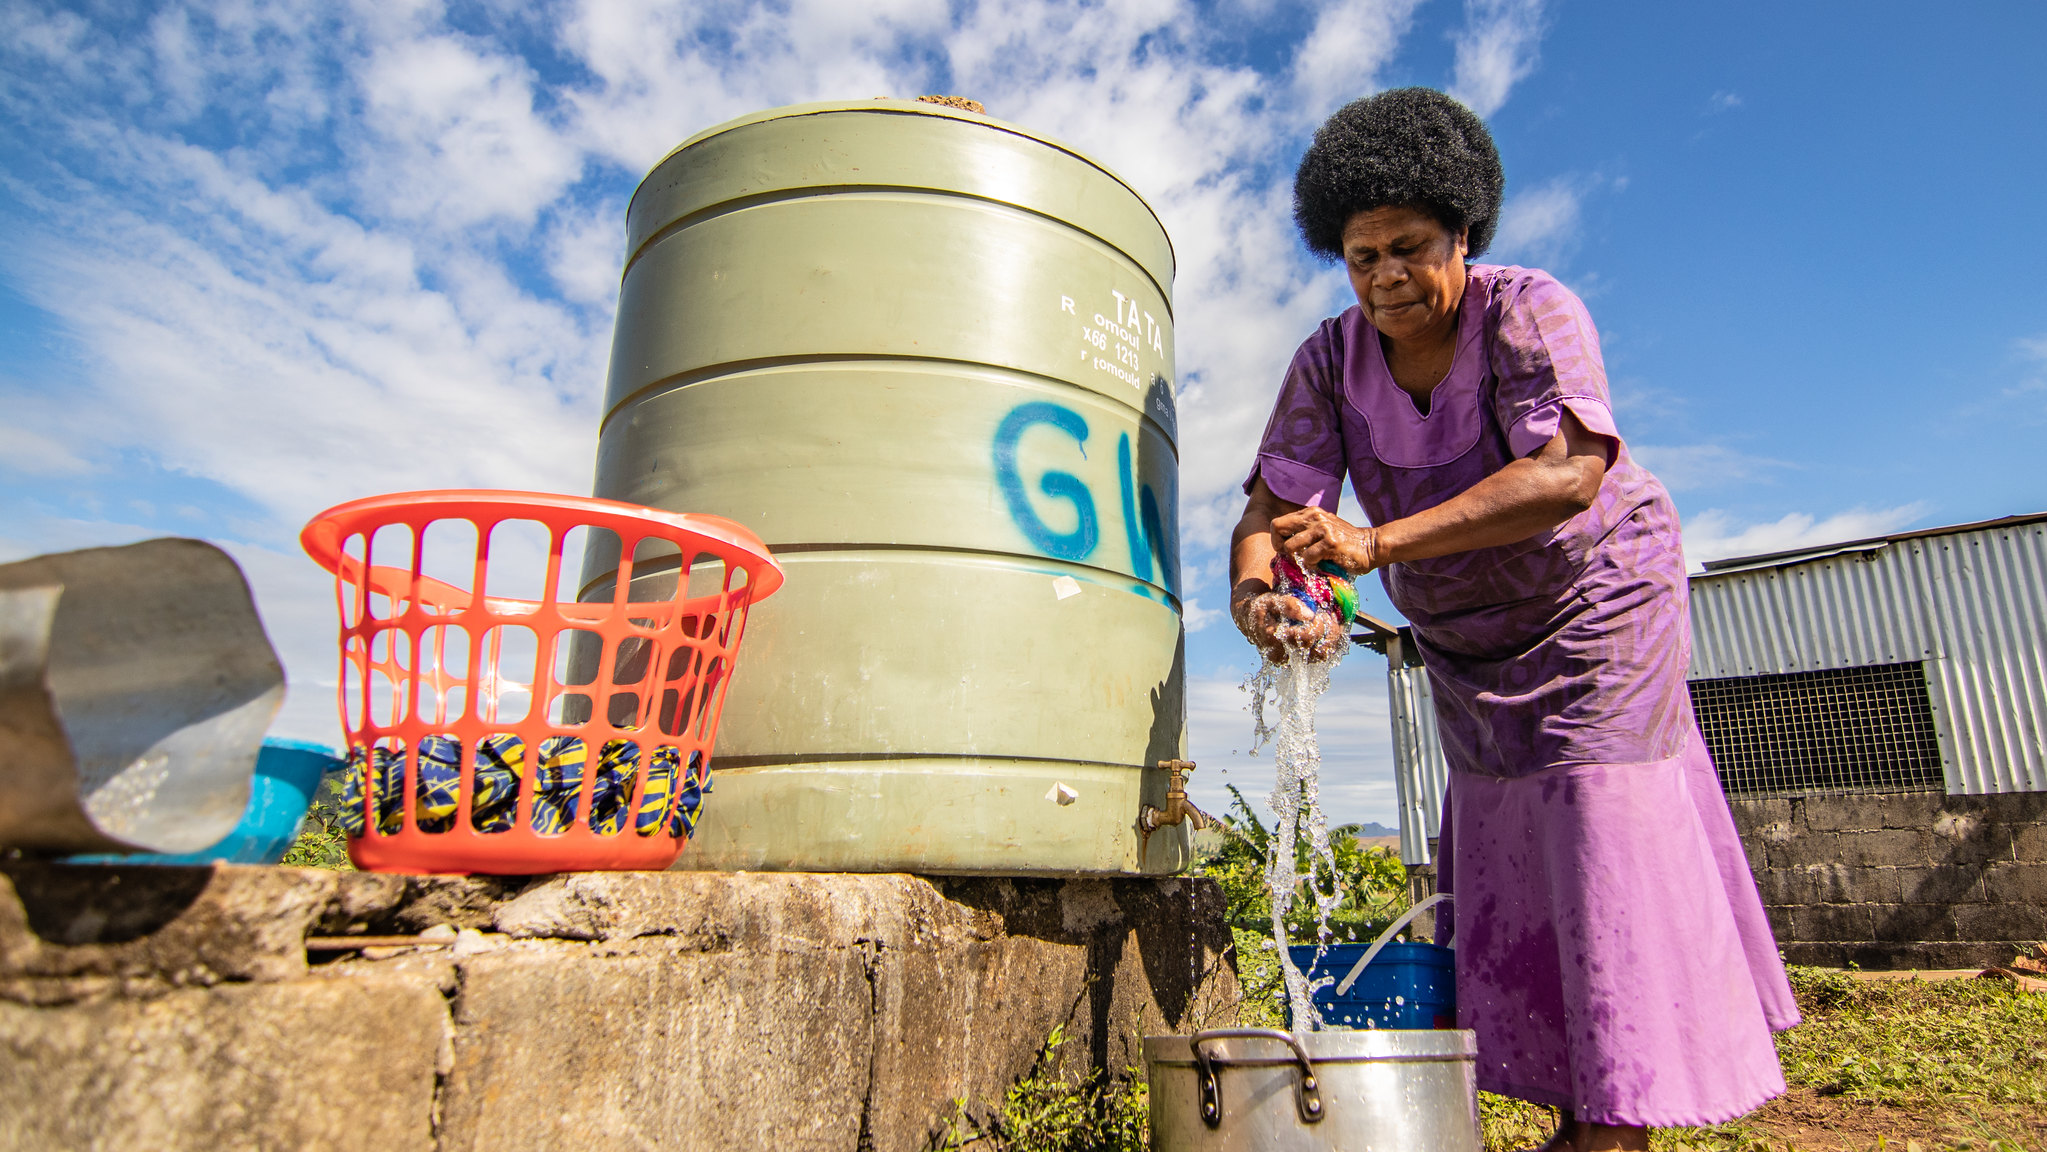 A Fijian woman wrings out her washing over a silver pot. She stands, outside, next to a water tank and an orange basket.